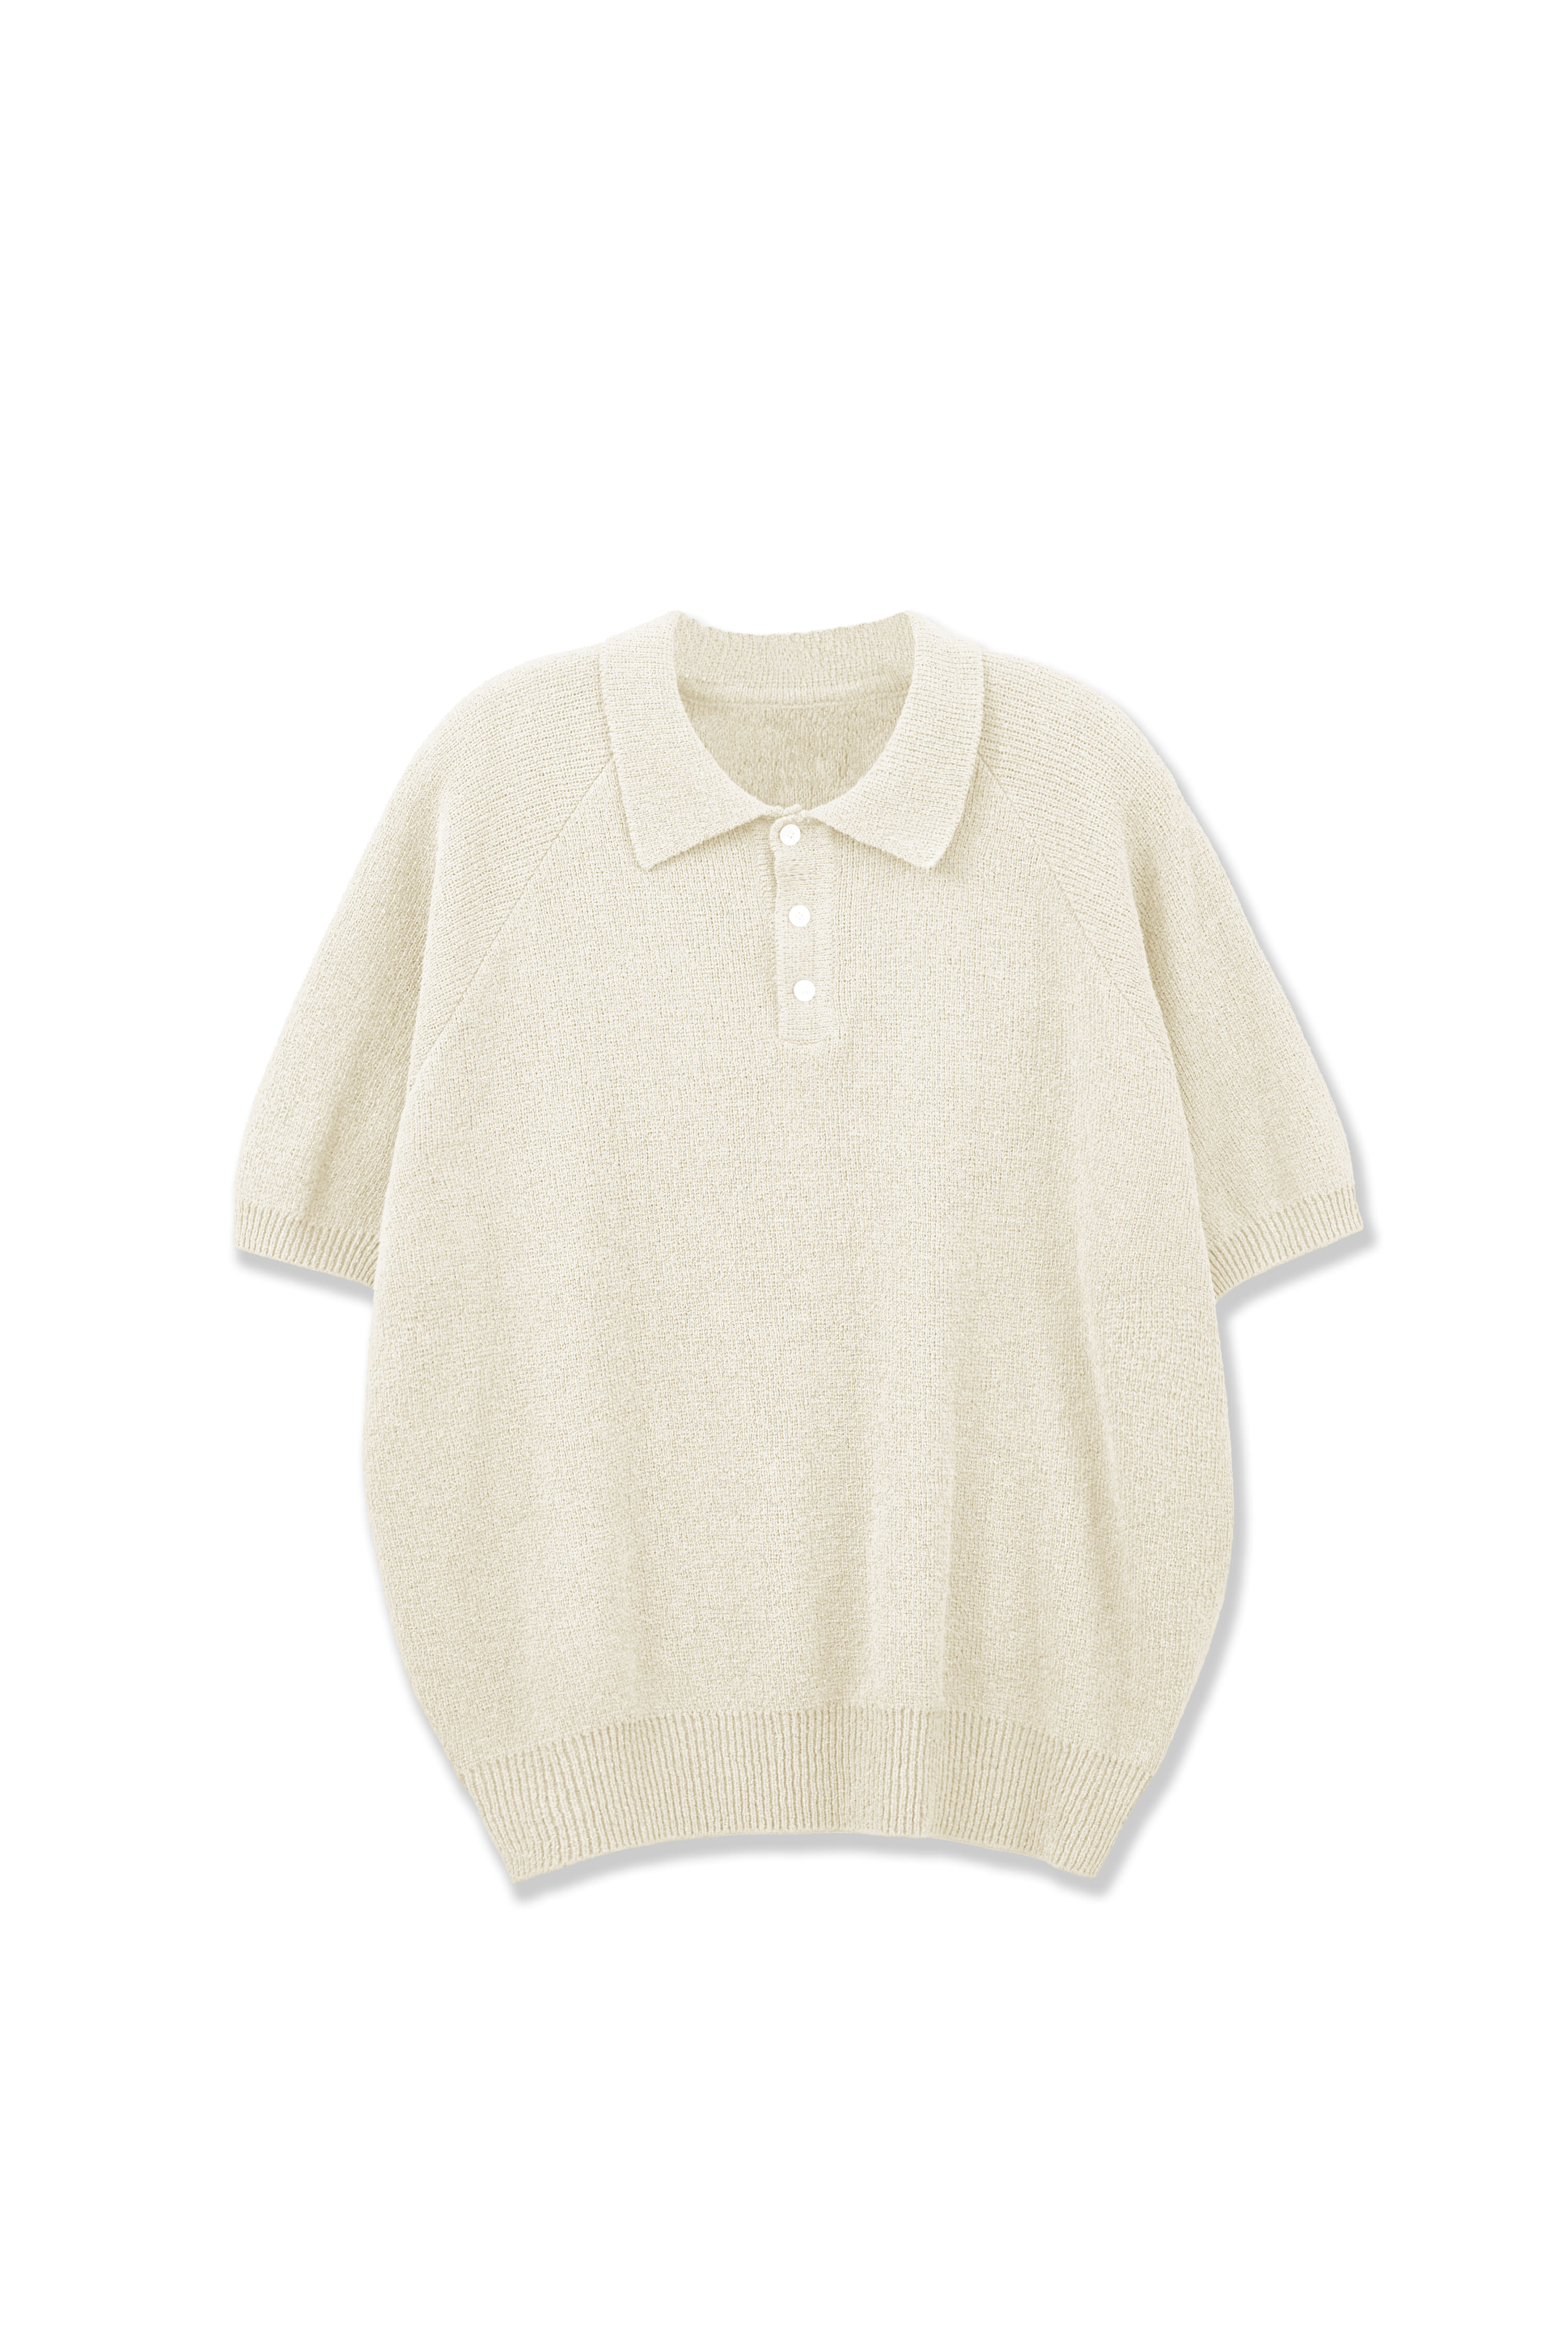 terry 1/2 collar knit_ivory